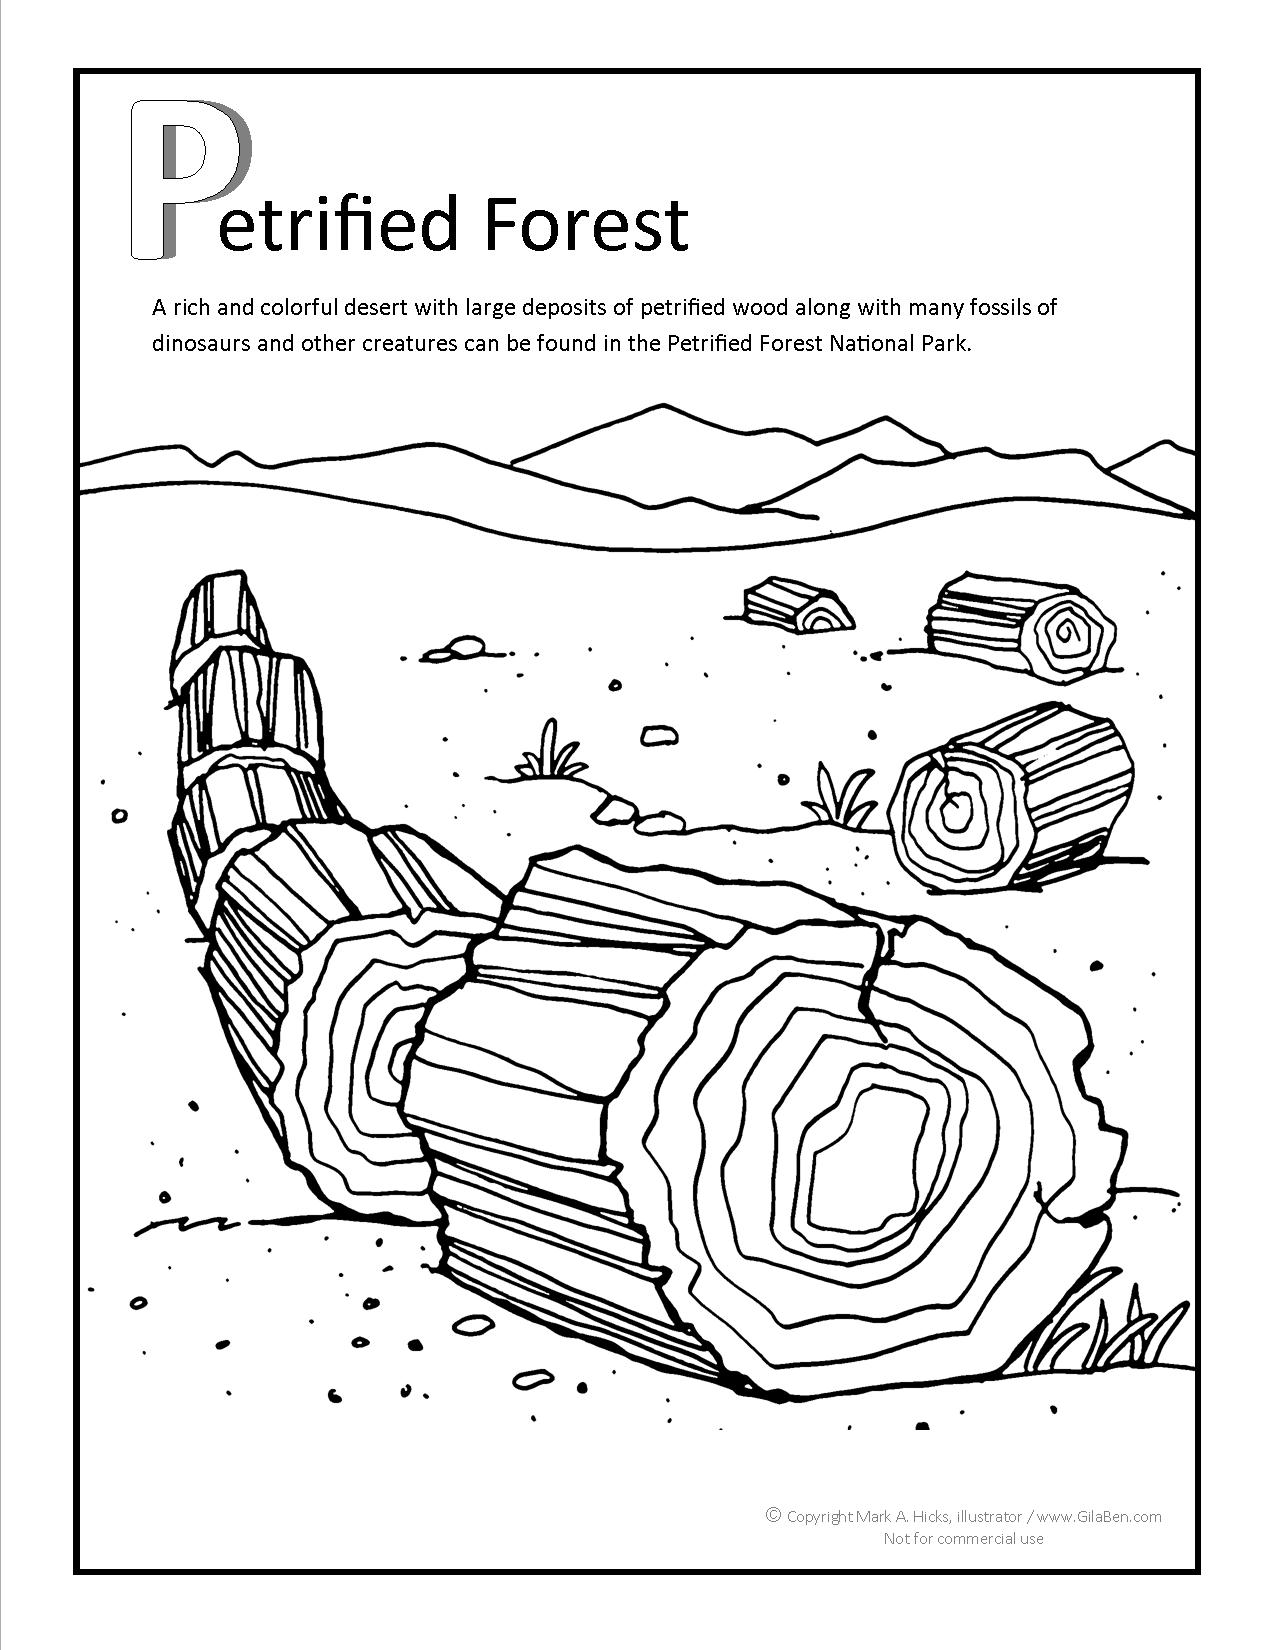 Petrified Forest Coloring page